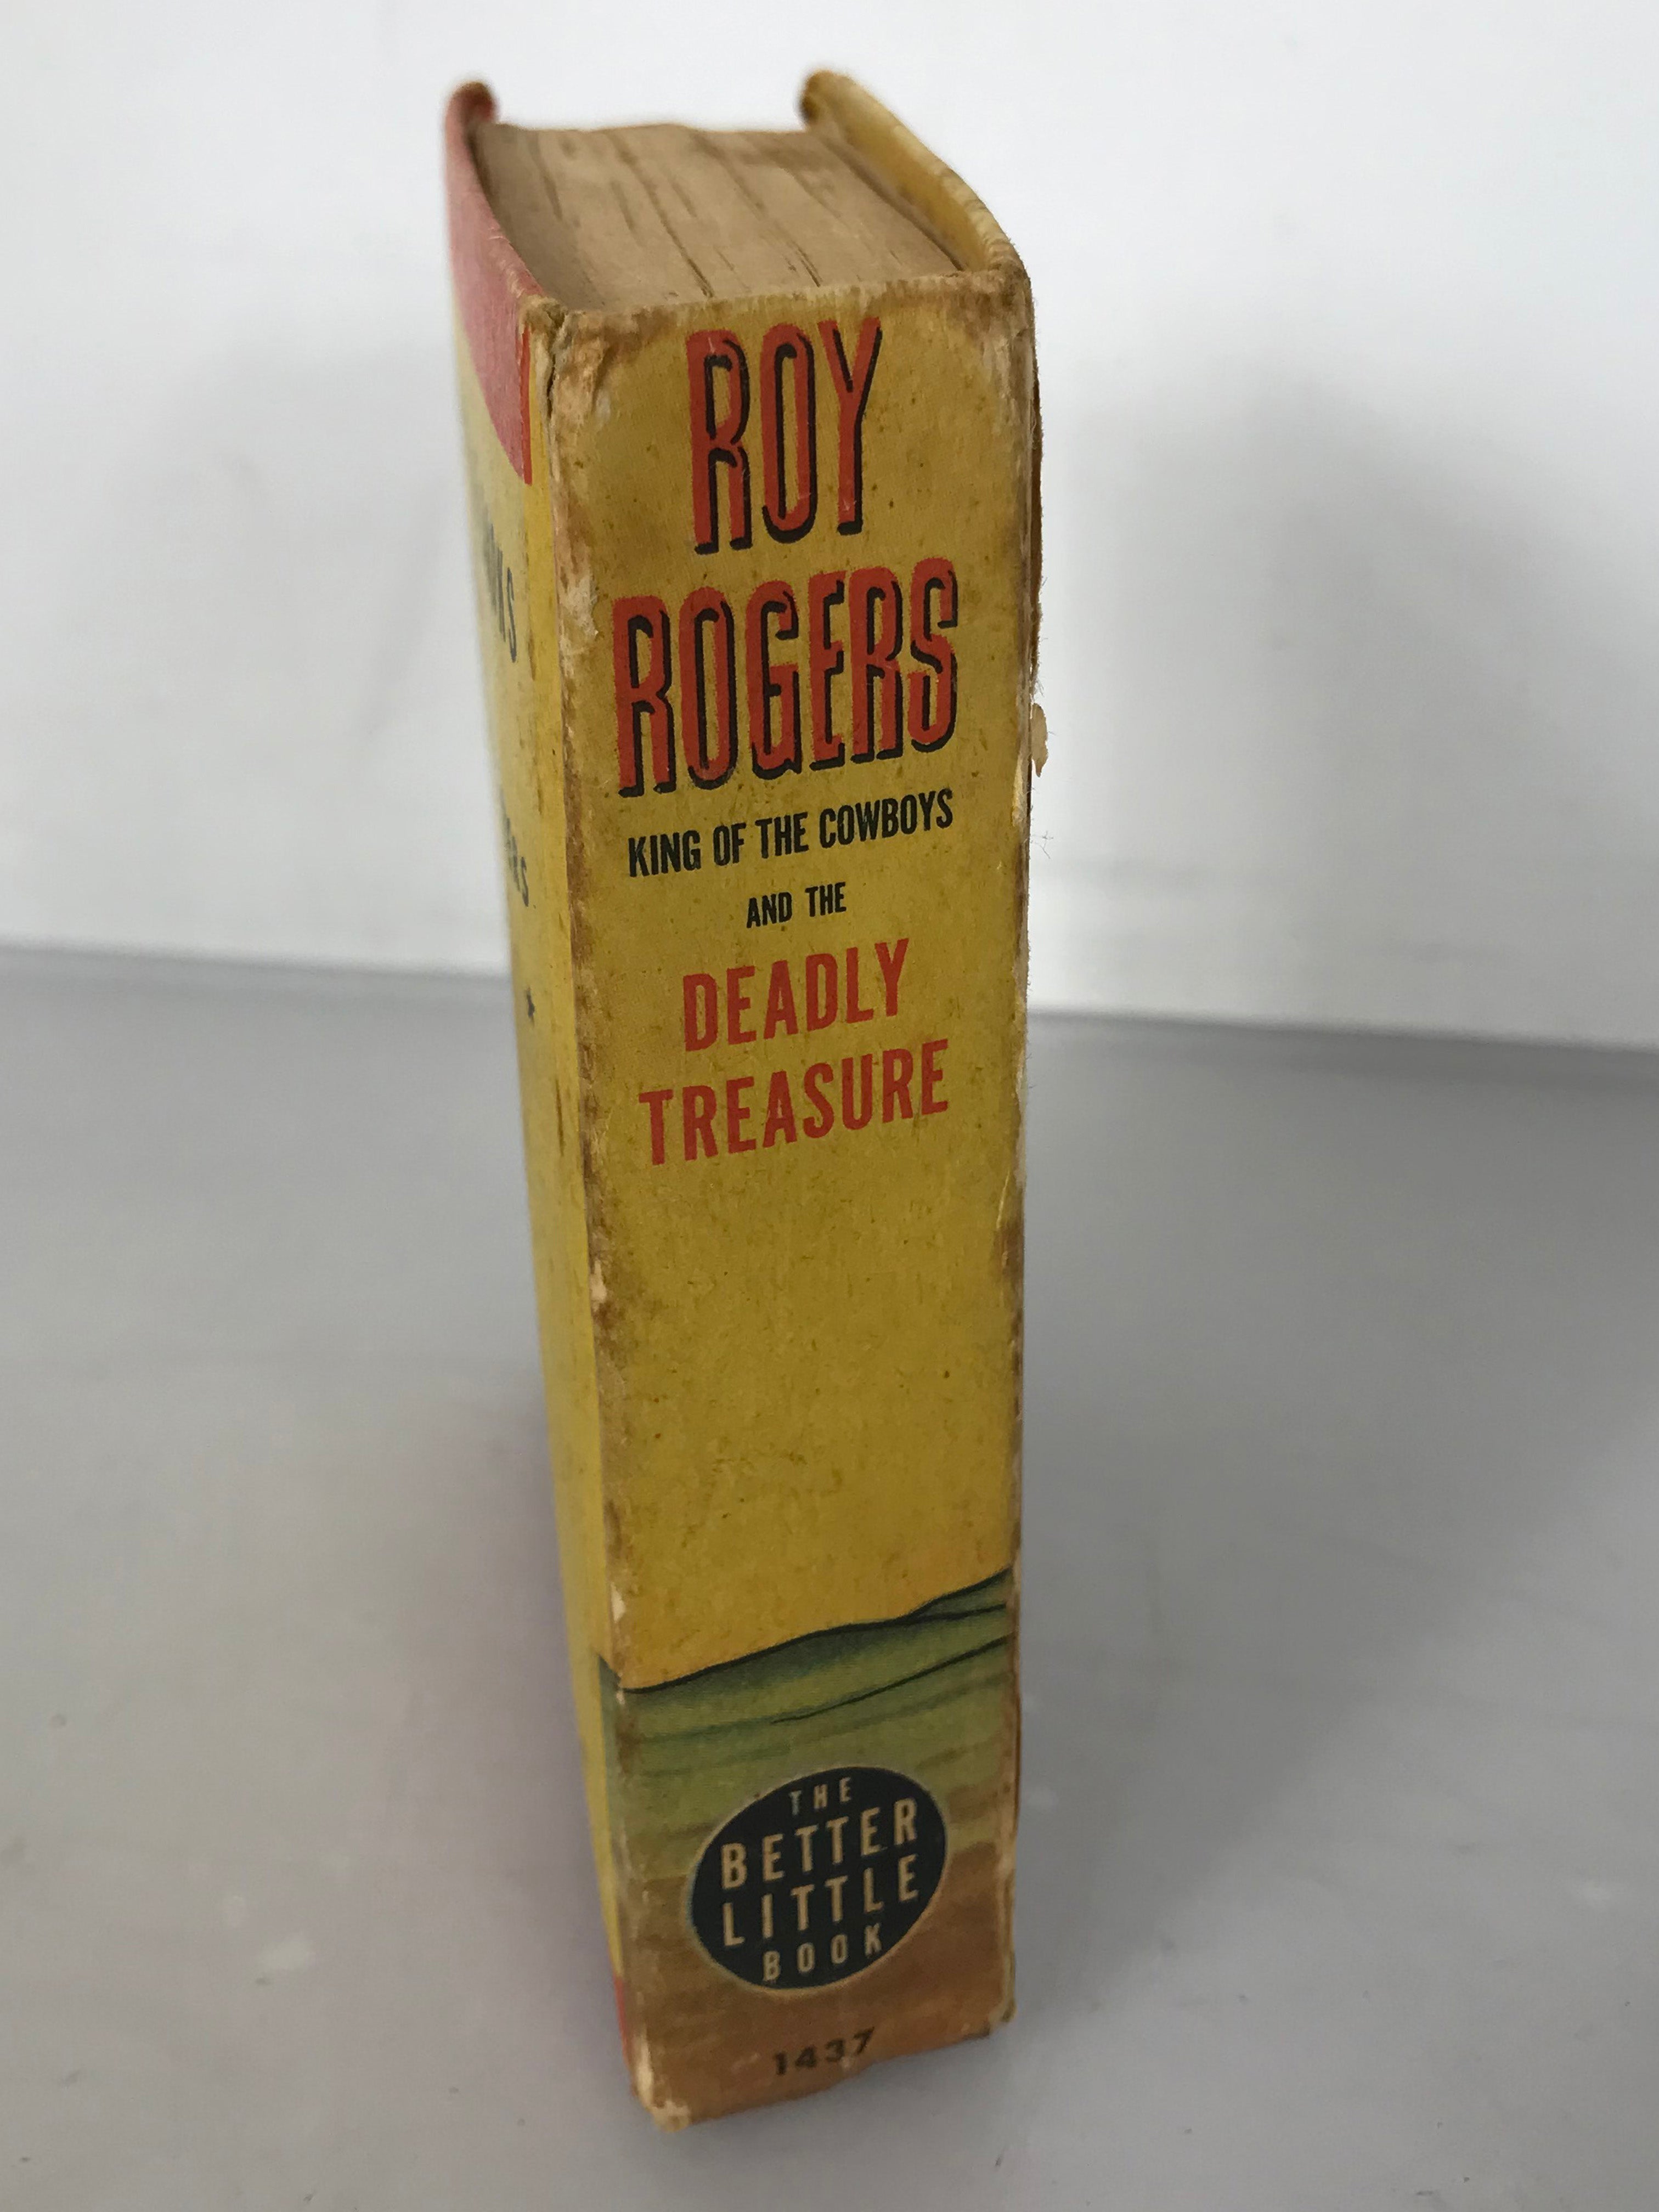 Roy Rogers and the Deadly Treasure 1947 The Better Little Book 1437